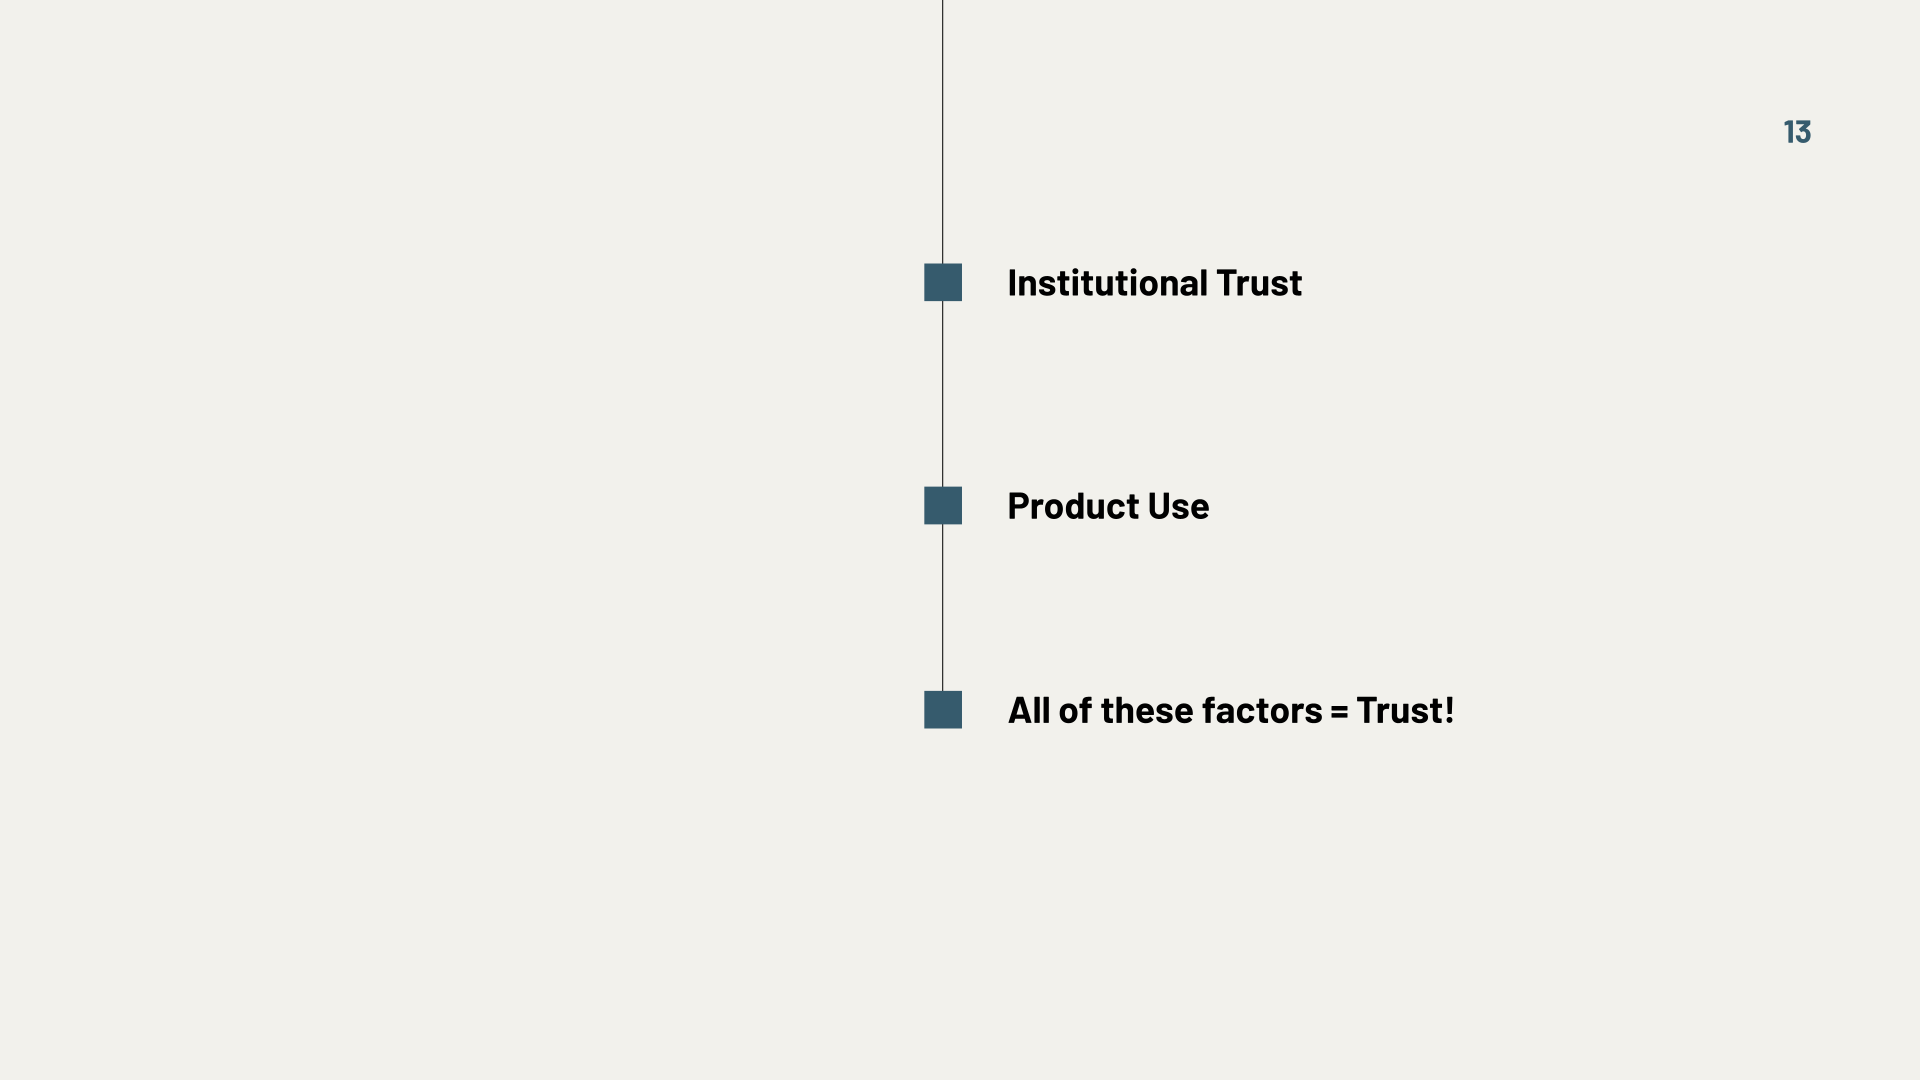 Developing Trust Metric Pres.pptx(9).png